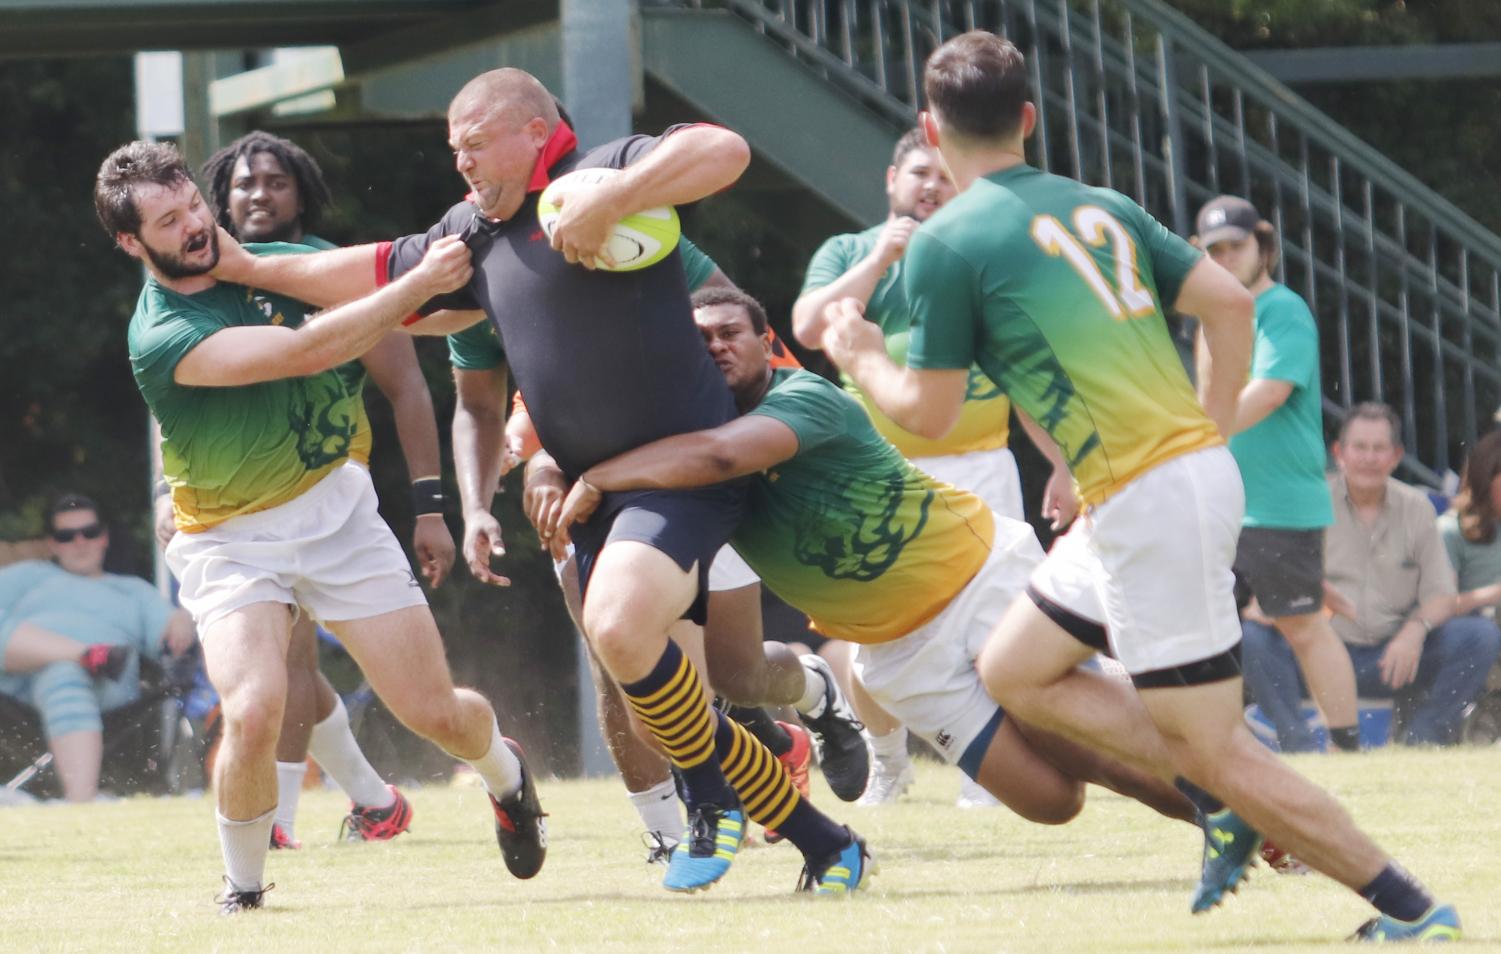 Southeastern Rugby Club makes a comeback - The Lion's Roar